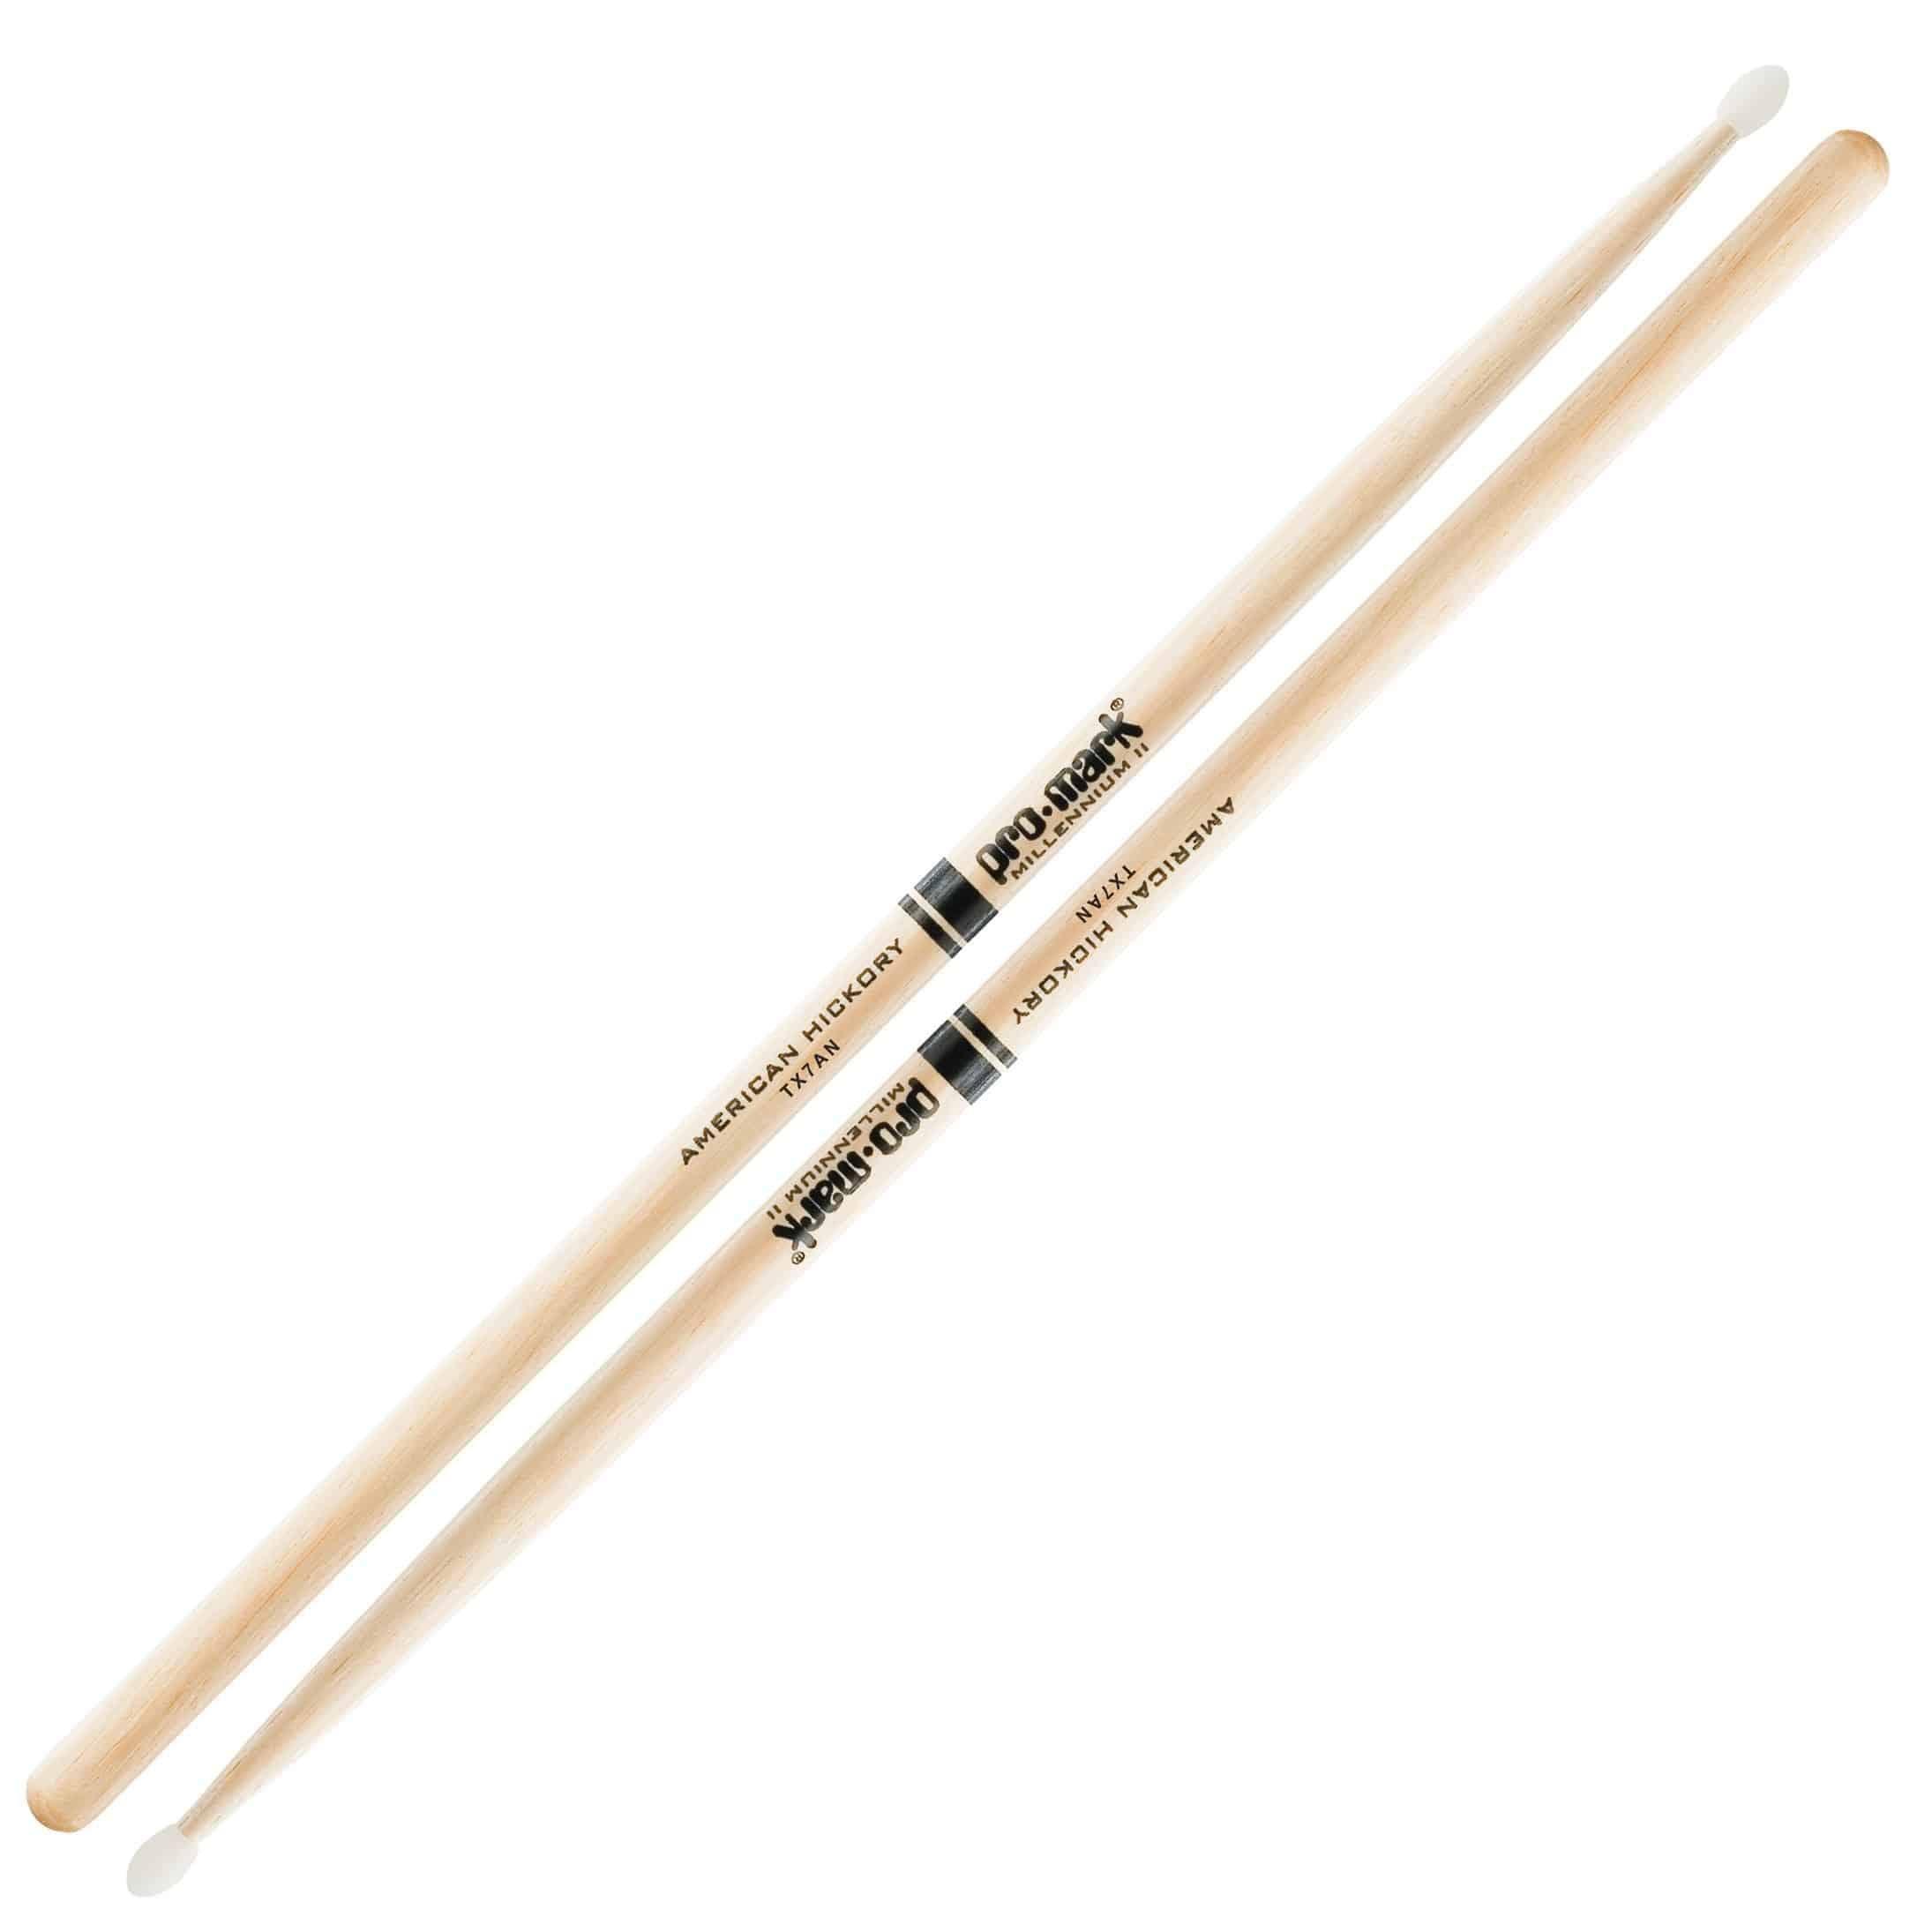 Promark - 7A Nylon Tip Drumsticks American Hickory - Drums & Percussion - Sticks & Mallets by Promark at Muso's Stuff